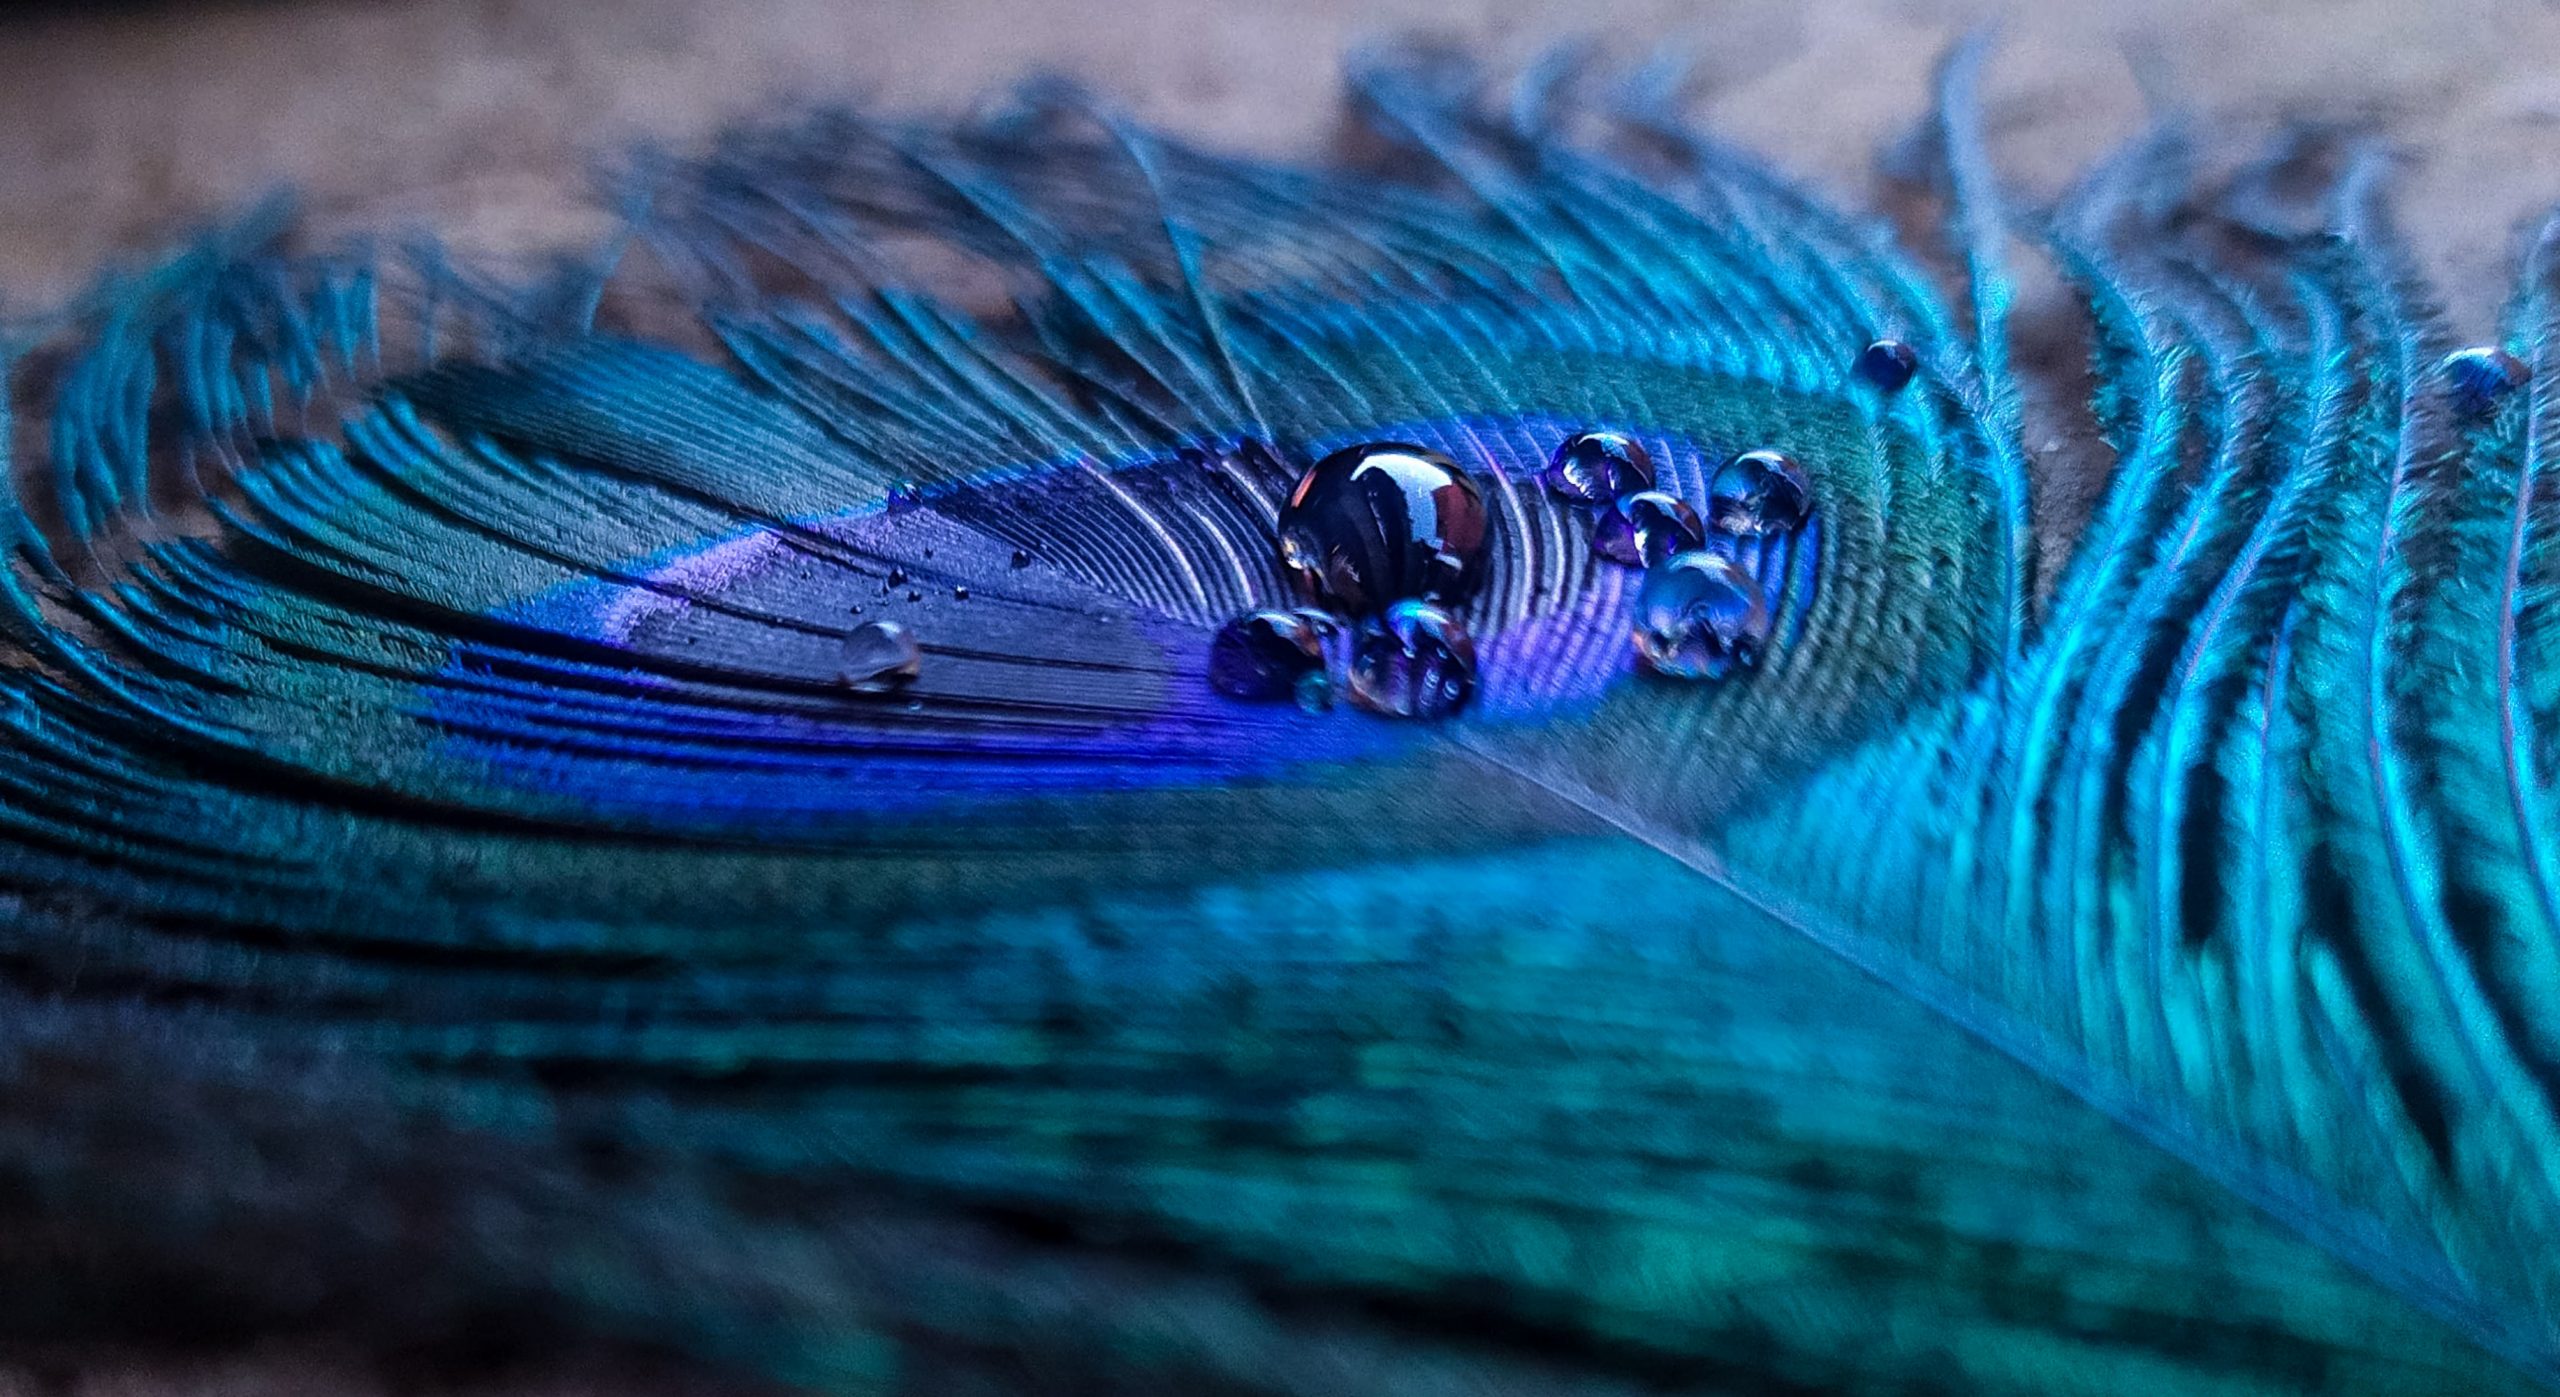 Water drops on peacock feather